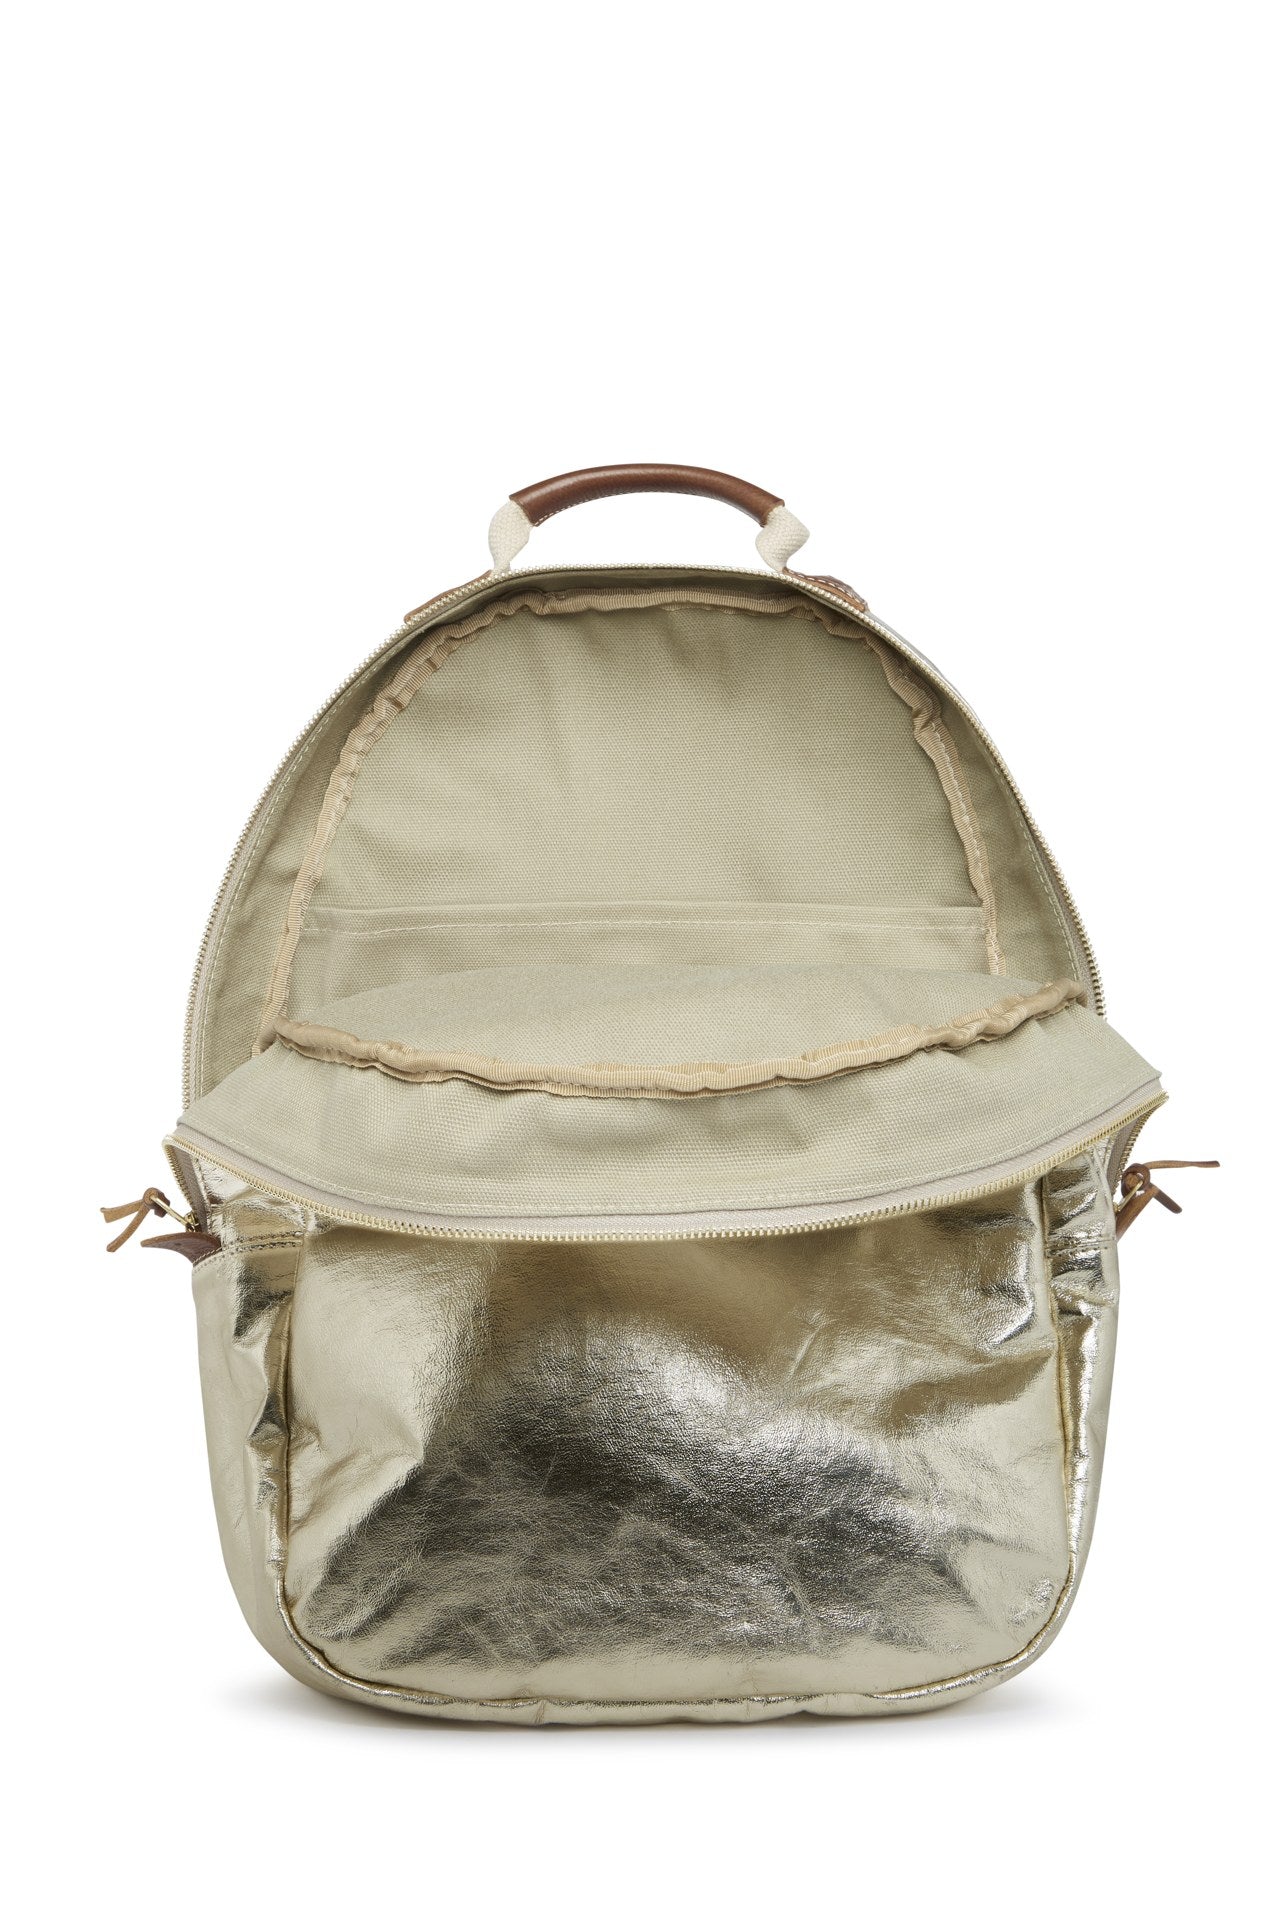 A washable paper oval shaped backpack is shown from the front angle, unzipped and open. It reveals two inner pockets in a cotton lining. The backpack is metallic gold in colour.